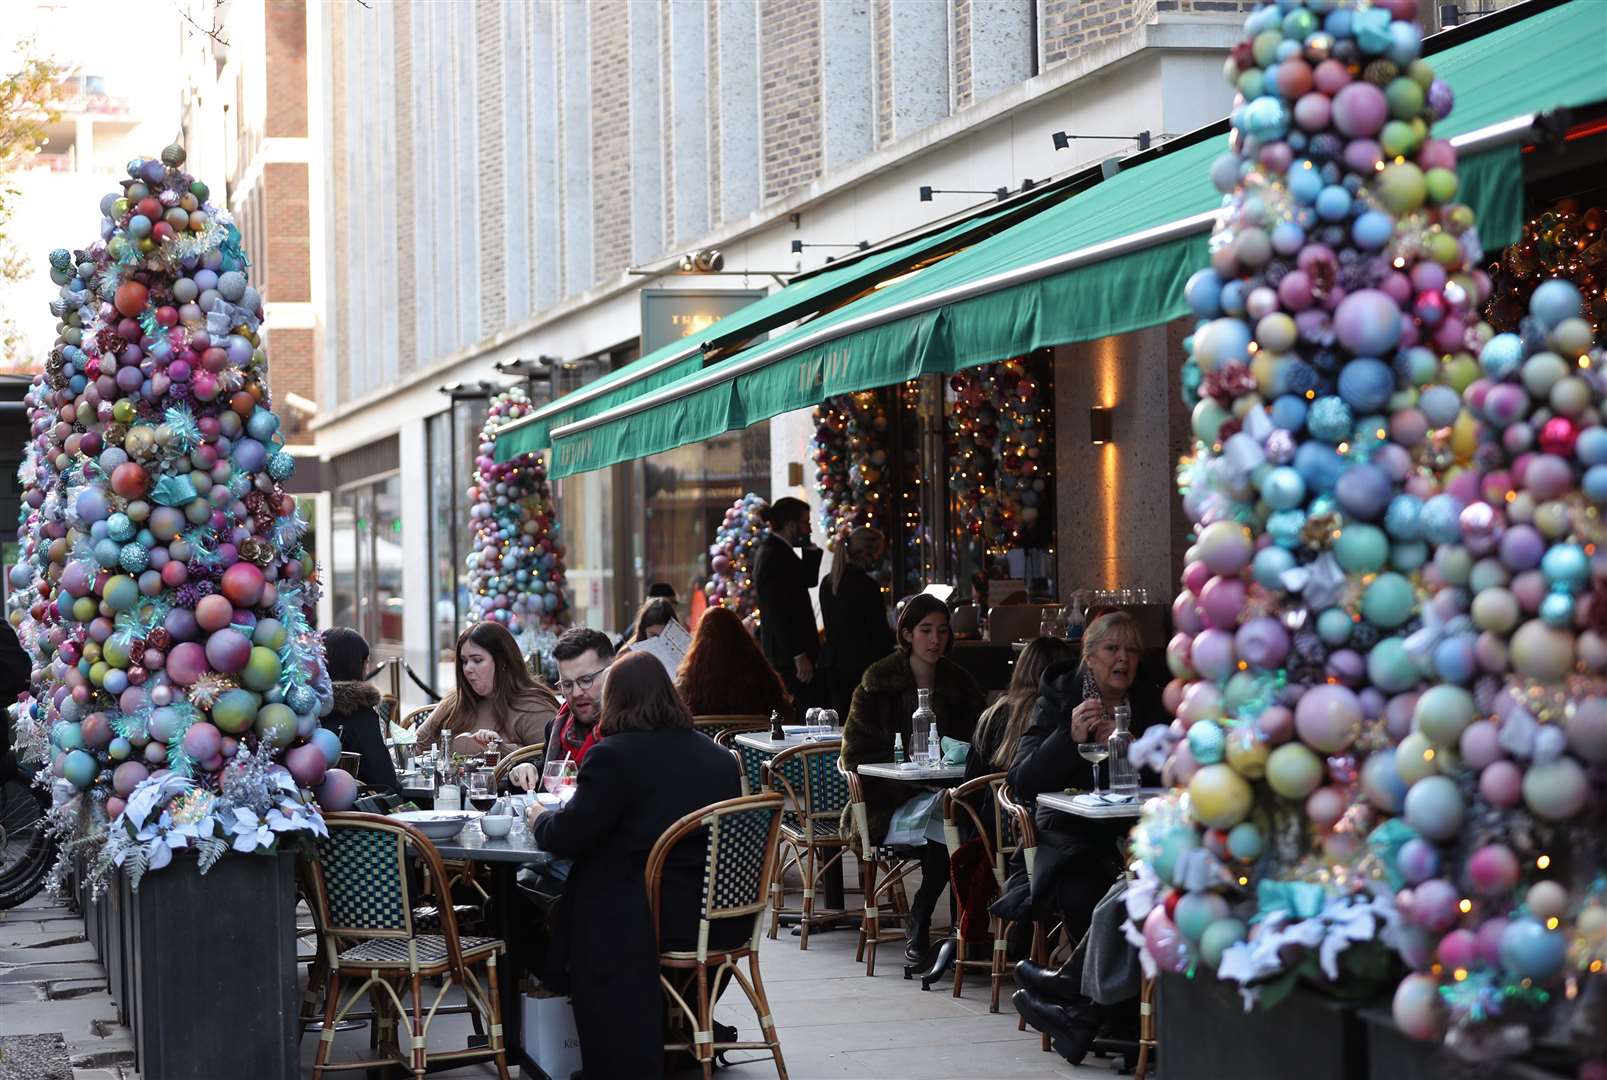 People dining on outdoor tables at a restaurant in Soho, London (Yui Mok/PA)